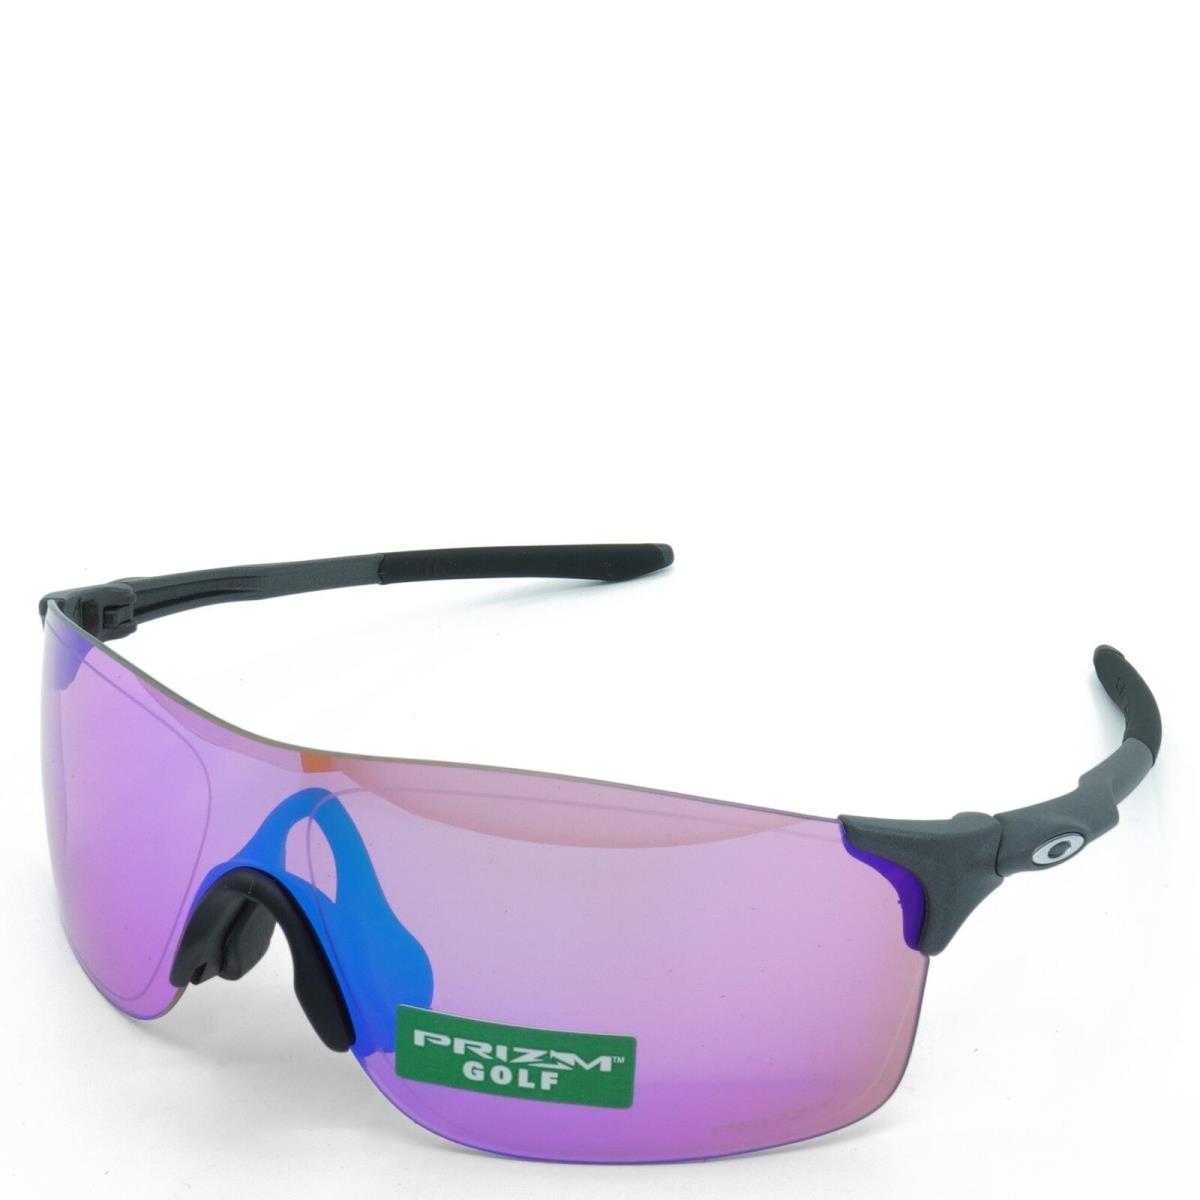 OO9388-05 Mens Oakley Evzero Pitch A Sunglasses - Frame: Silver, Lens: Pink